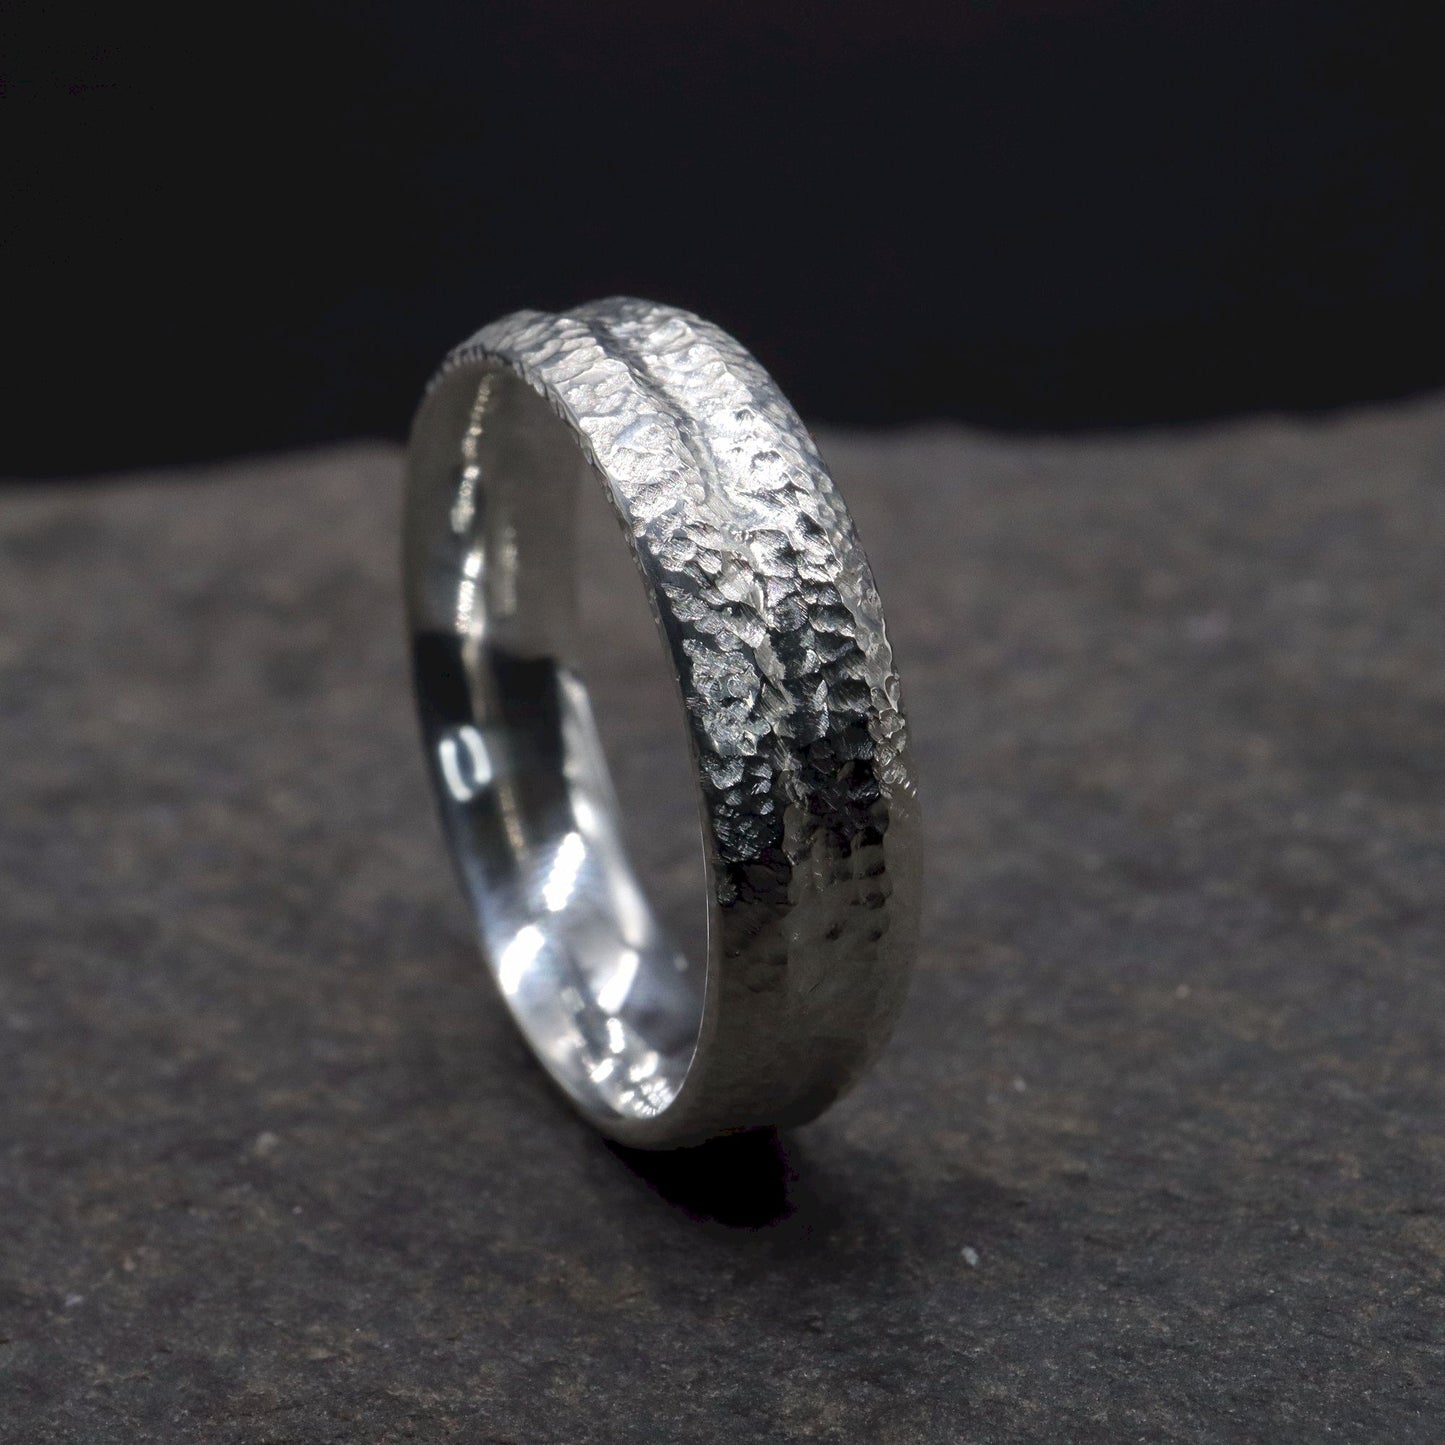 White gold wide wedding ring with a carved rustic pattern, Fleetwith Pike design.